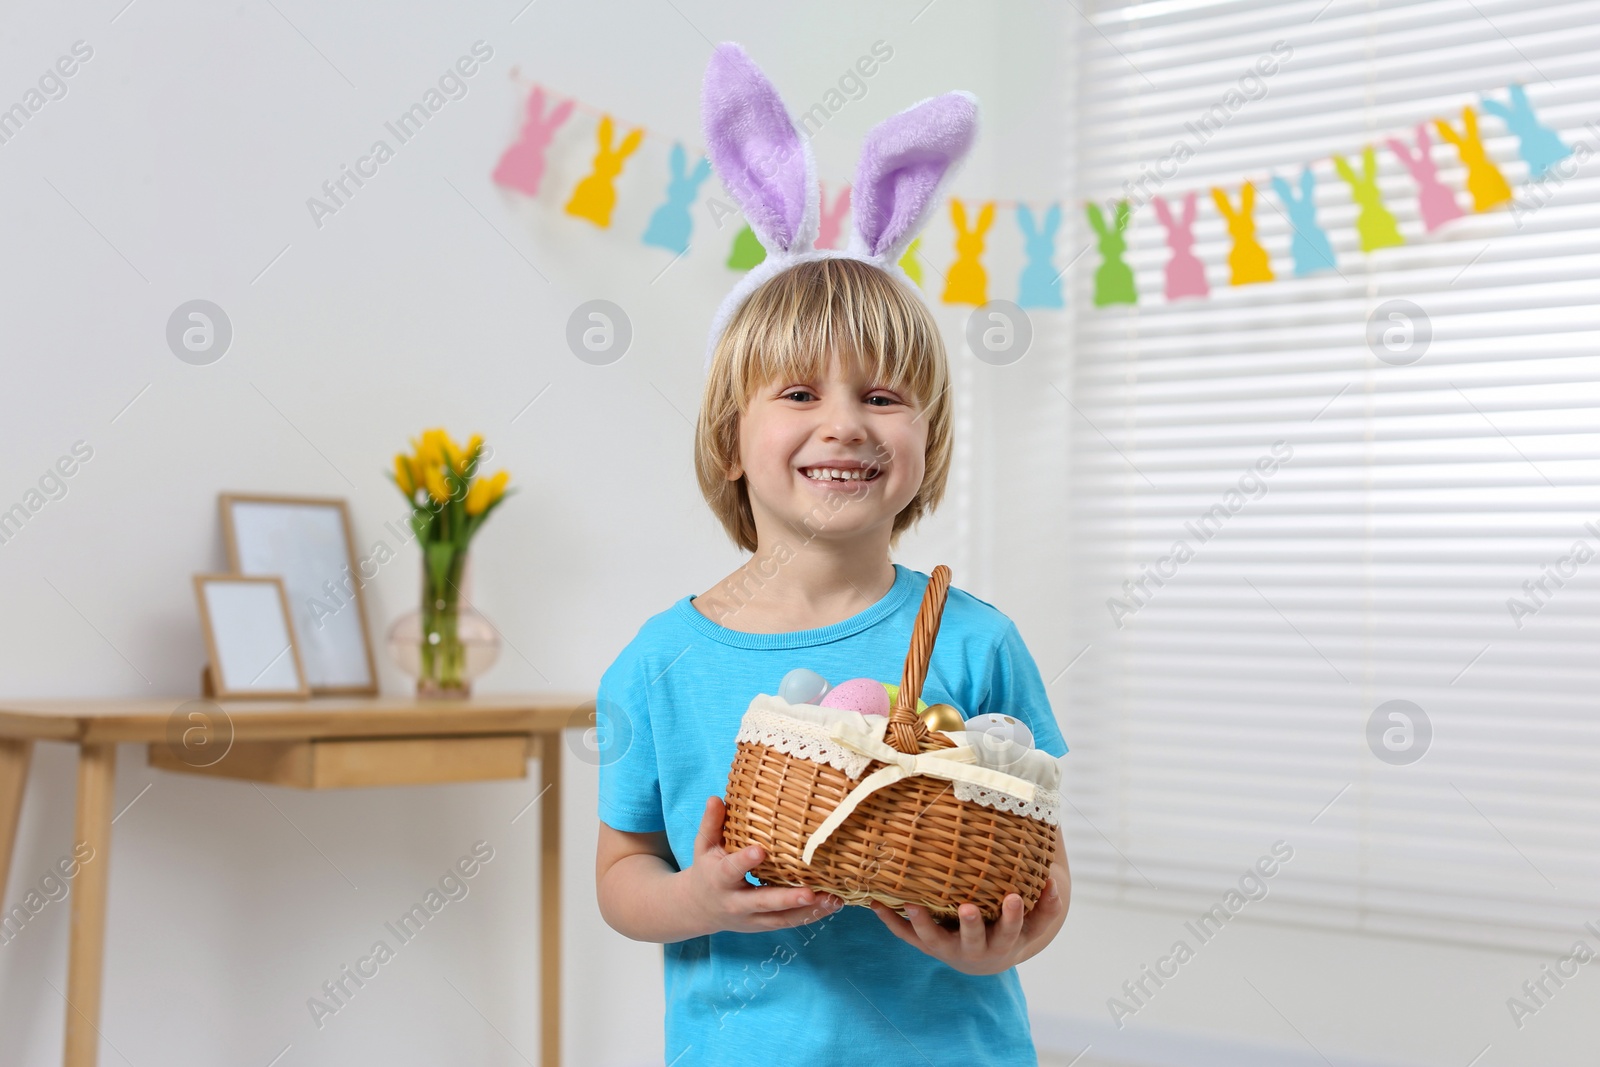 Photo of Happy boy in bunny ears headband holding wicker basket with painted Easter eggs indoors